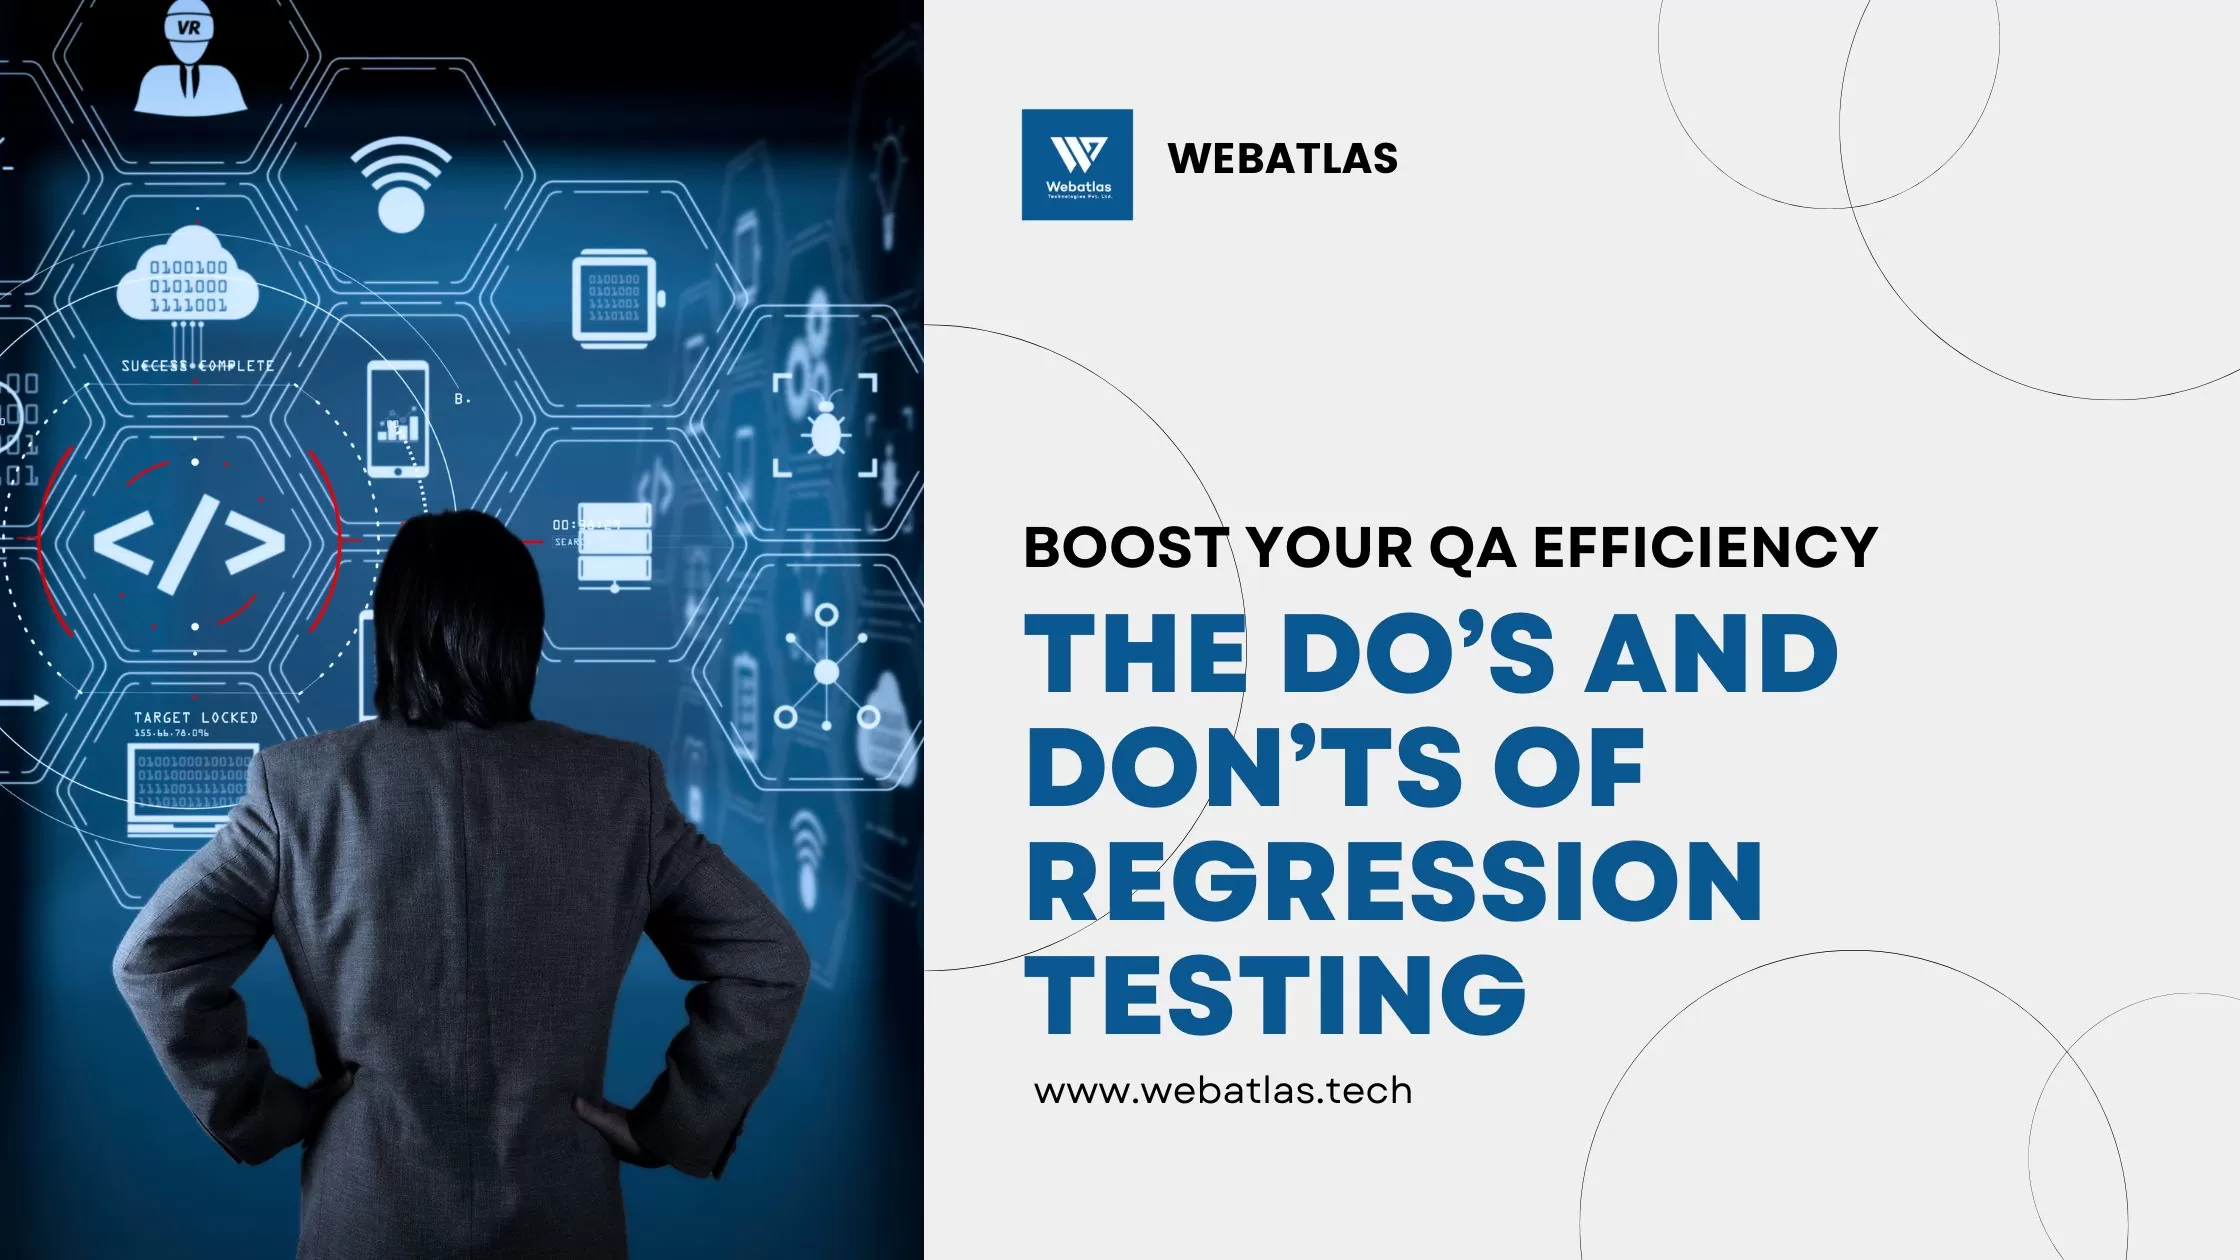 Do’s and Don’ts of Regression Testing